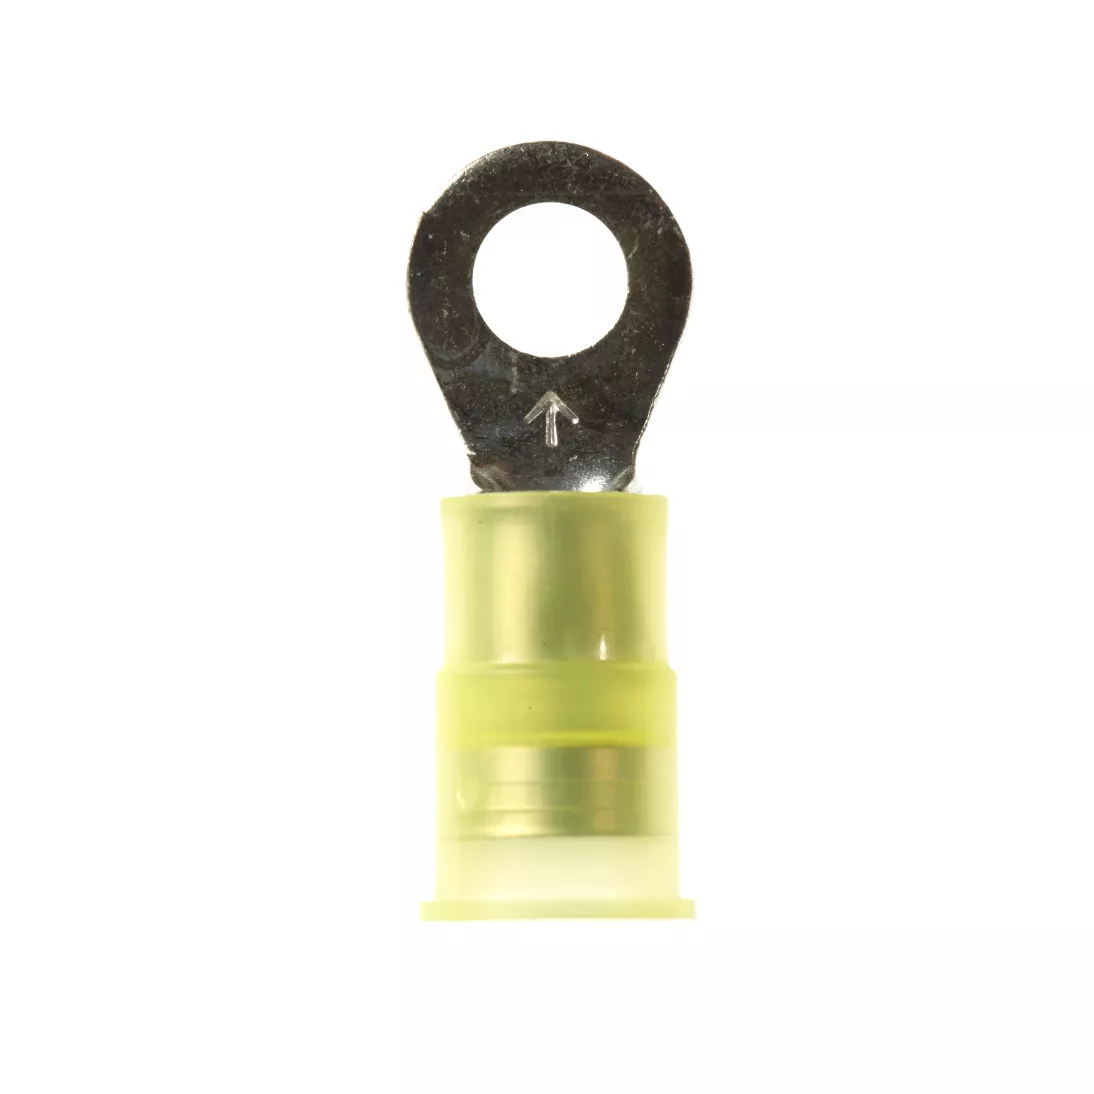 3M™ Scotchlok™ Ring Tongue, Nylon Insulated w/Insulation Grip
MNG10-10RK, Stud Size 10, 500/Case